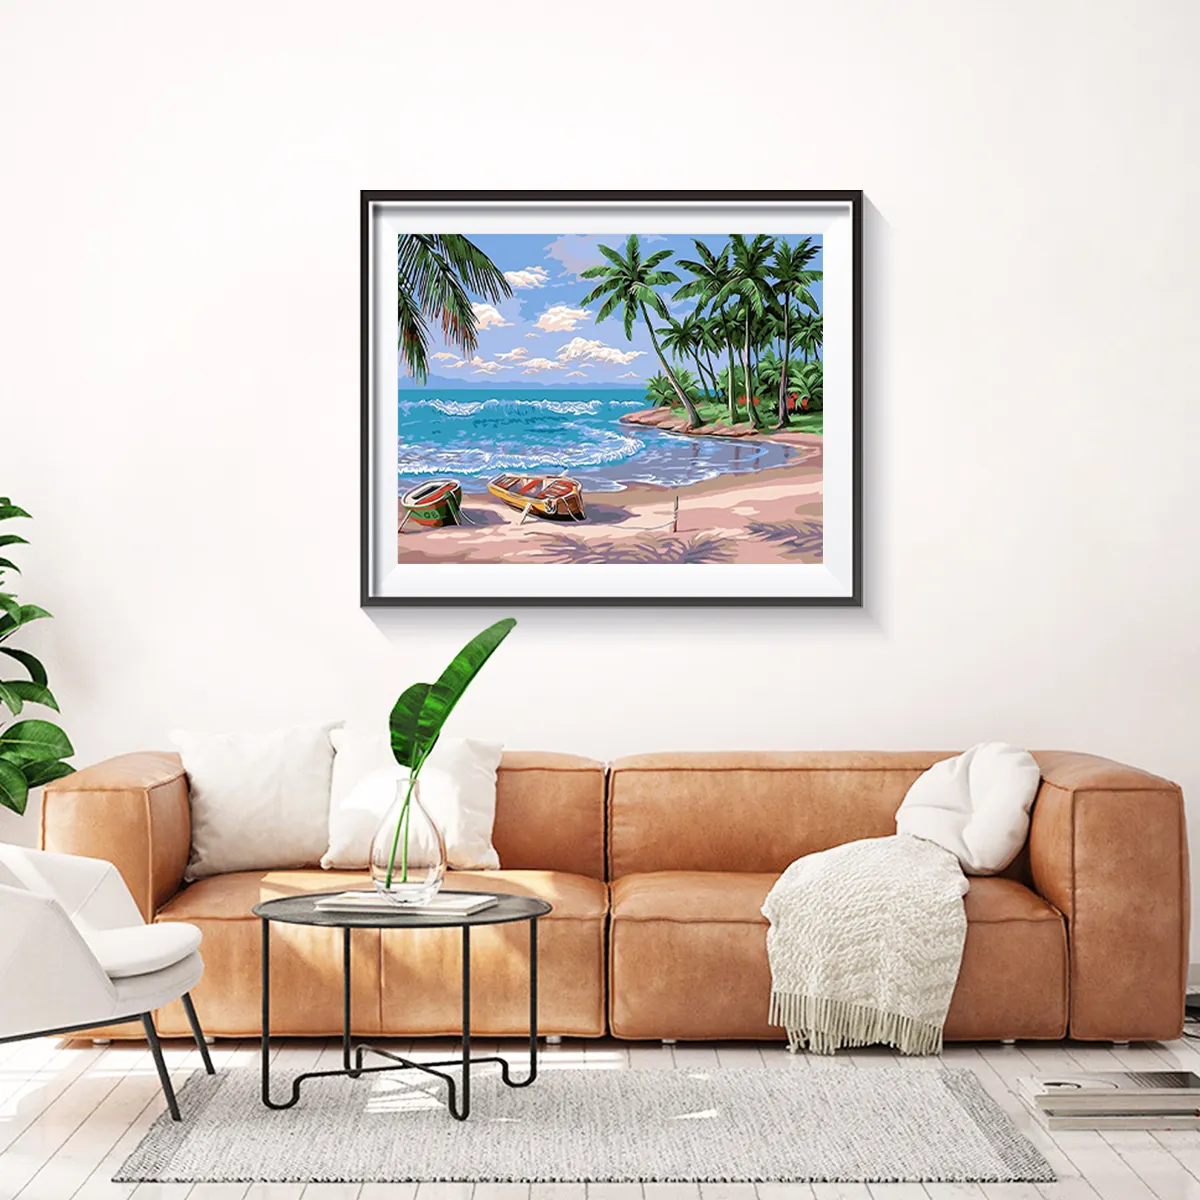 Customizable Modern Beach Scenery DIY Paint by Number Kit Adult Living Room Wall Art Decoration Office Gifts